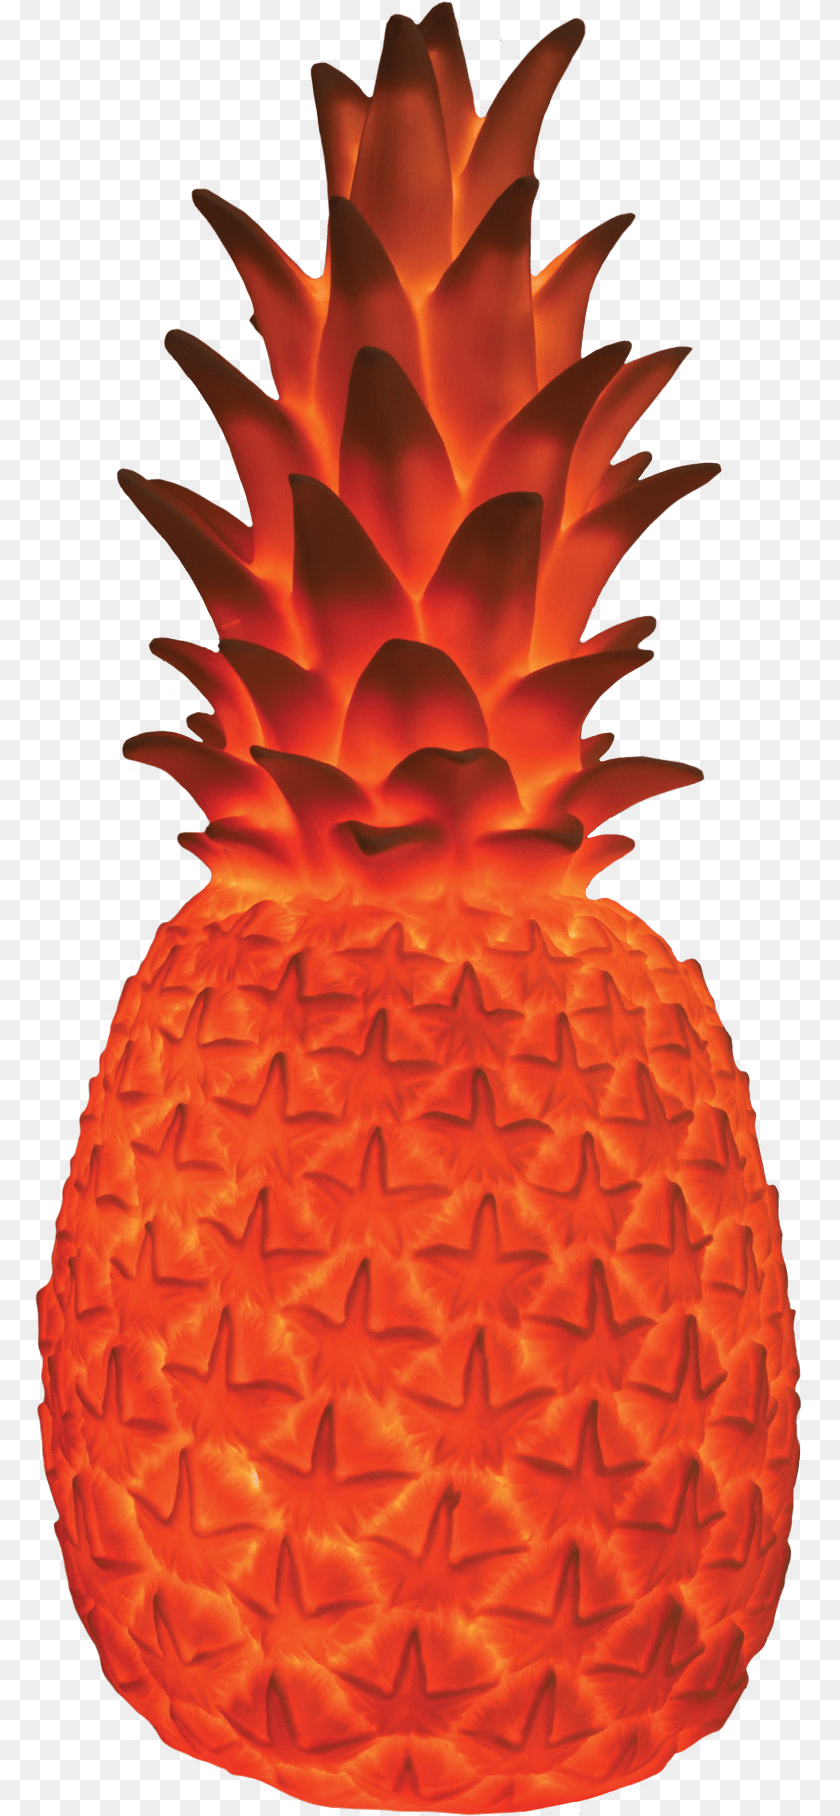 773x1816 Goodnight Pineapple Pineapple Transparent Cartoon Red Pineapple, Produce, Food, Fruit, Plant Sticker PNG